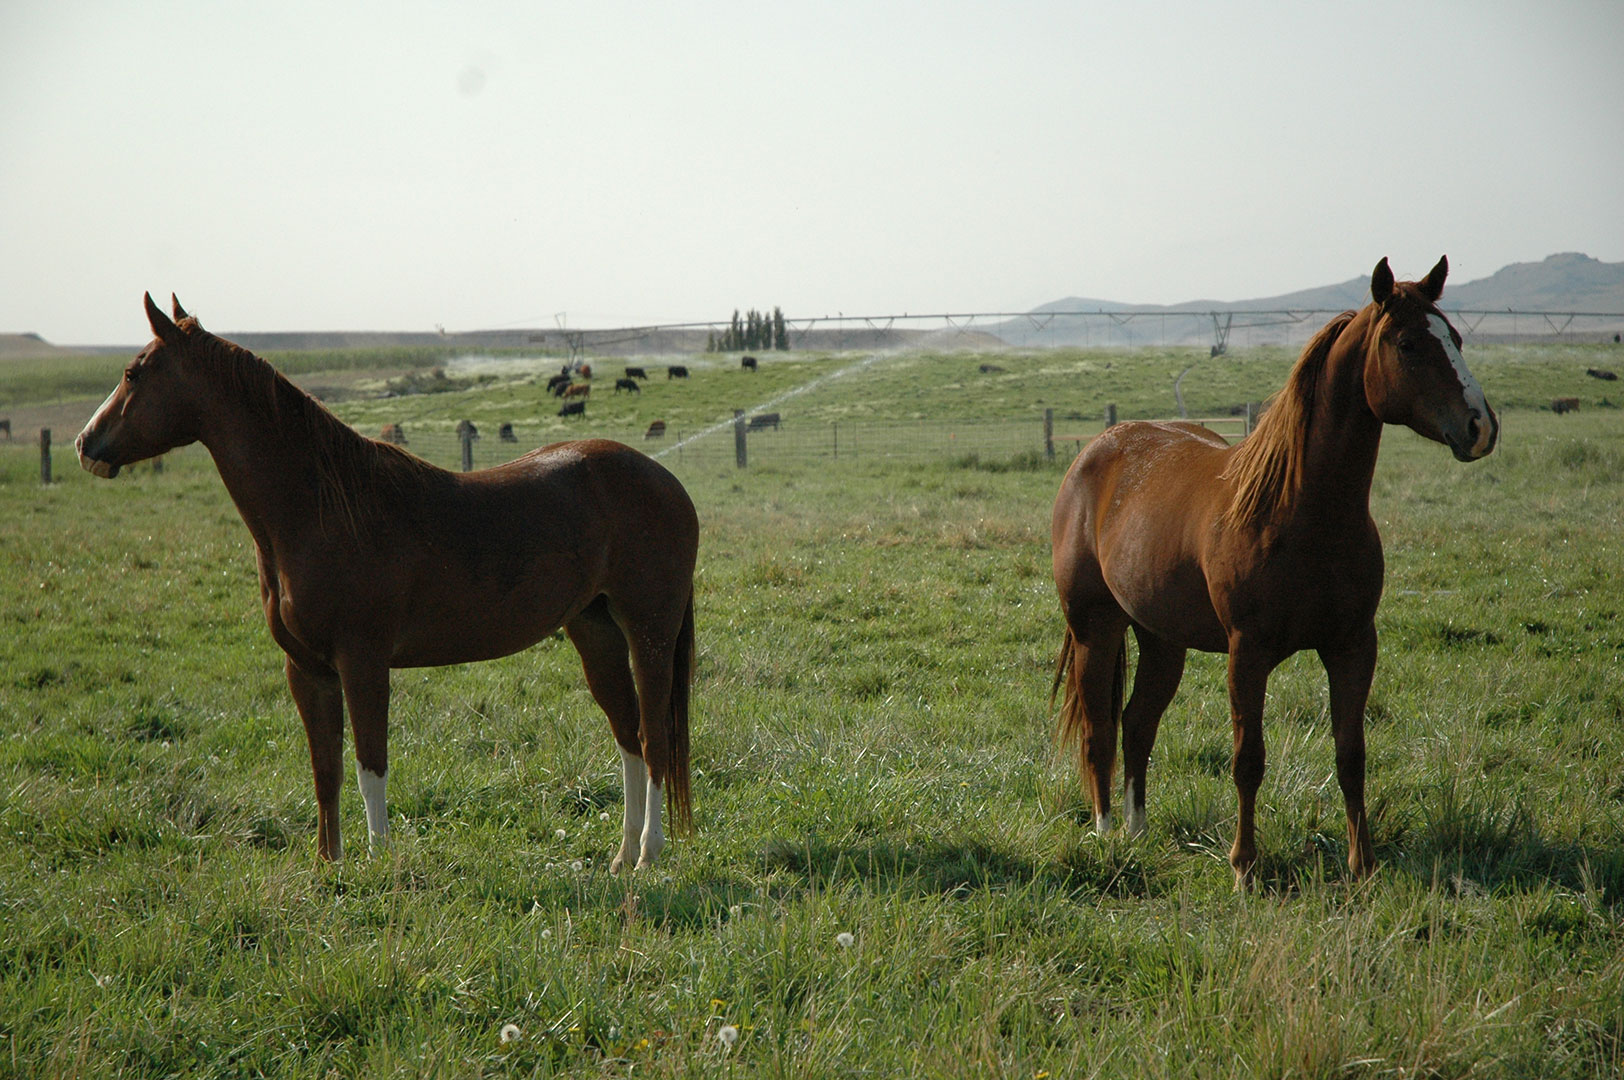 Image of two horses in a field with cattle grazing in the background.